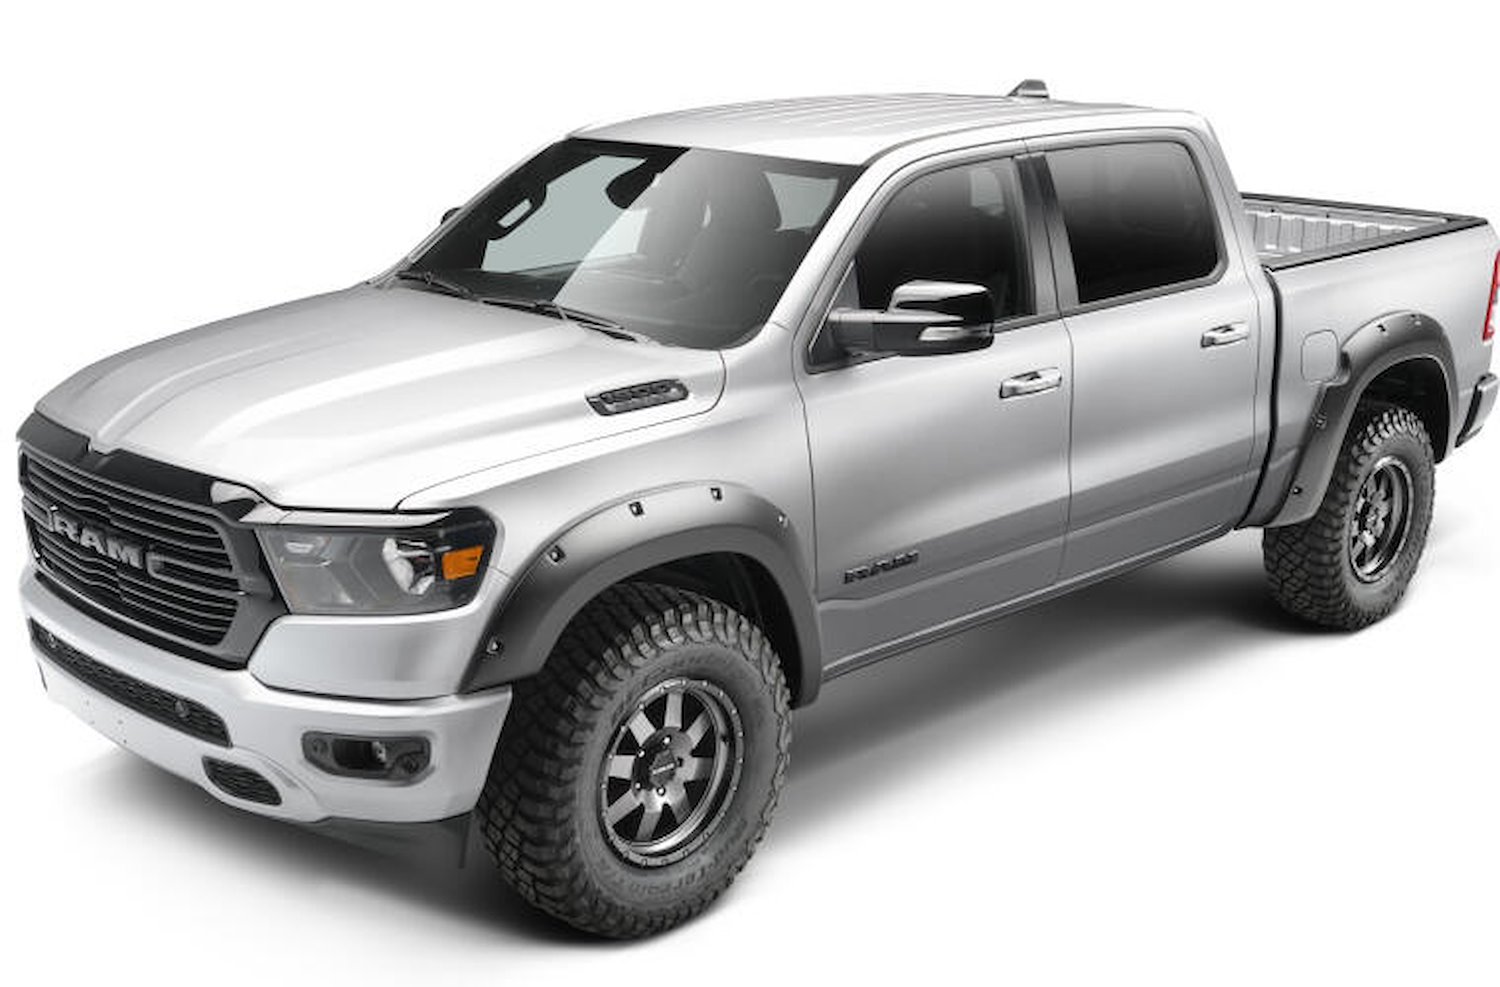 Forge Front/Rear Fender Flares for Late-Model Ram 2500/3500